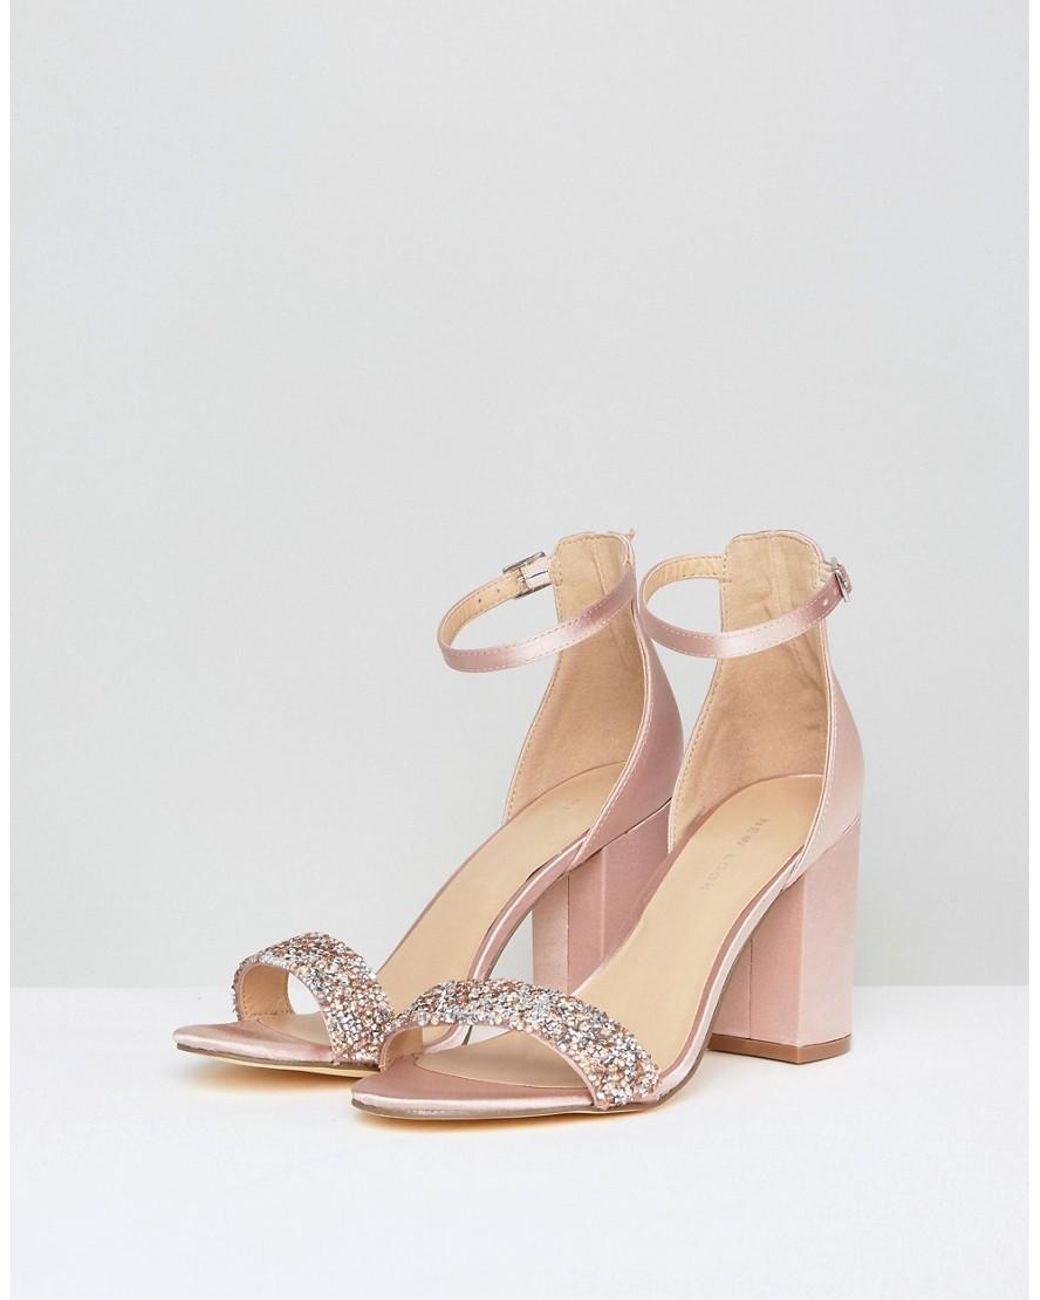 New Look Satin Block Heel Sandal With Crystal Embellishment in Pink | Lyst